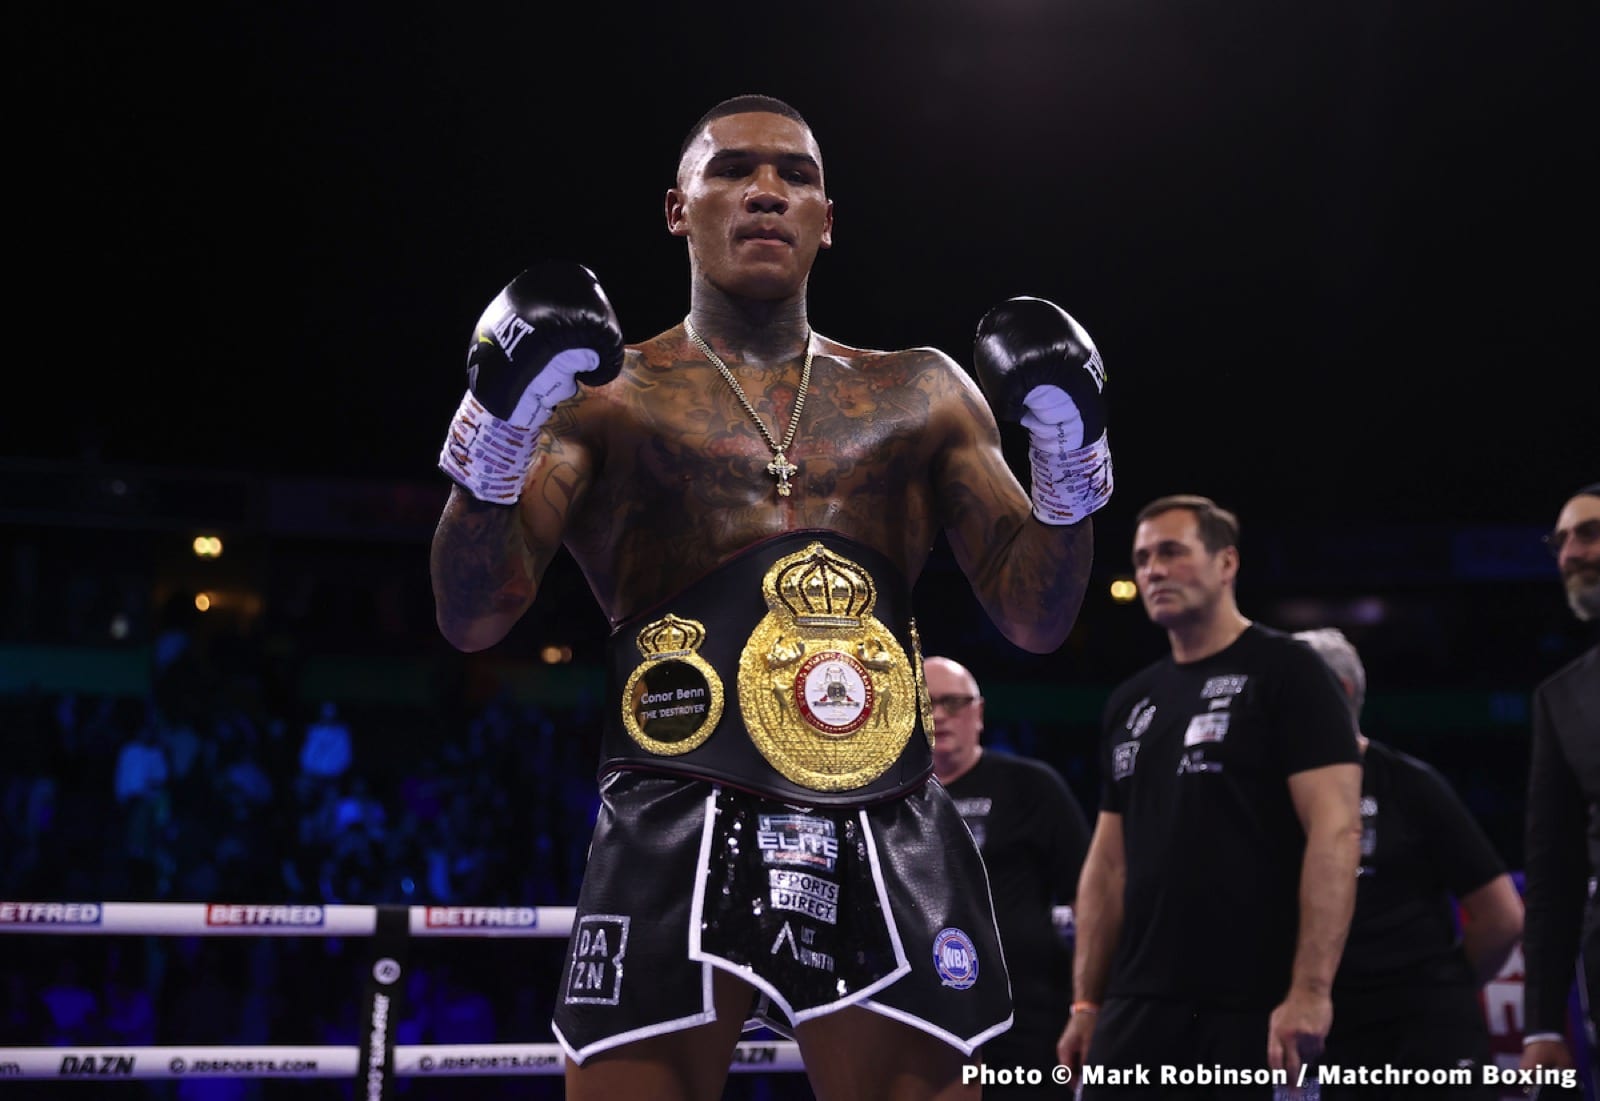 Image: Conor Benn's next fight could be revealed this week says Eddie Hearn